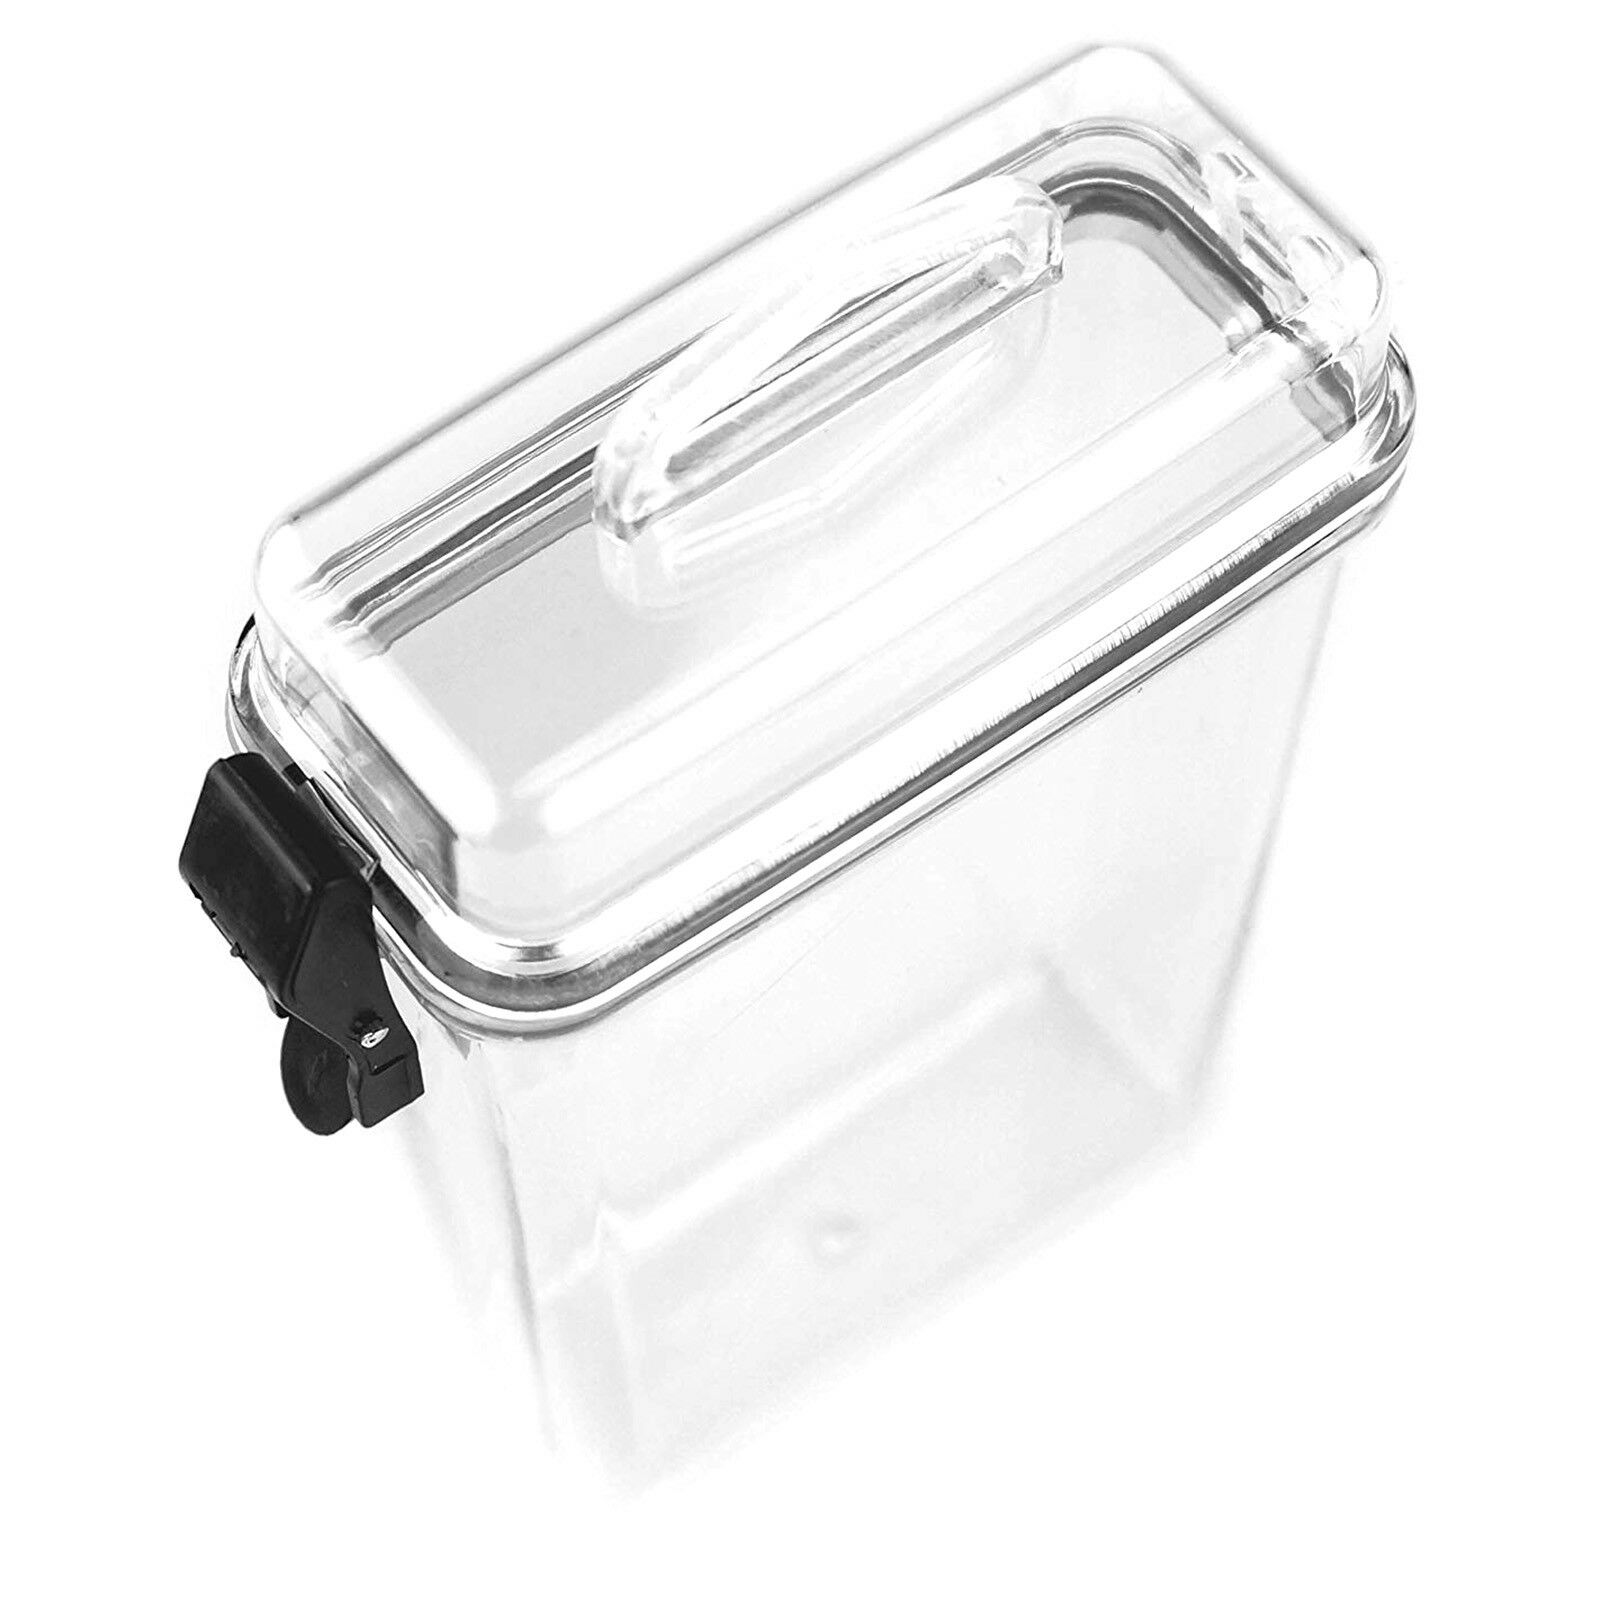 waterproof containers camping